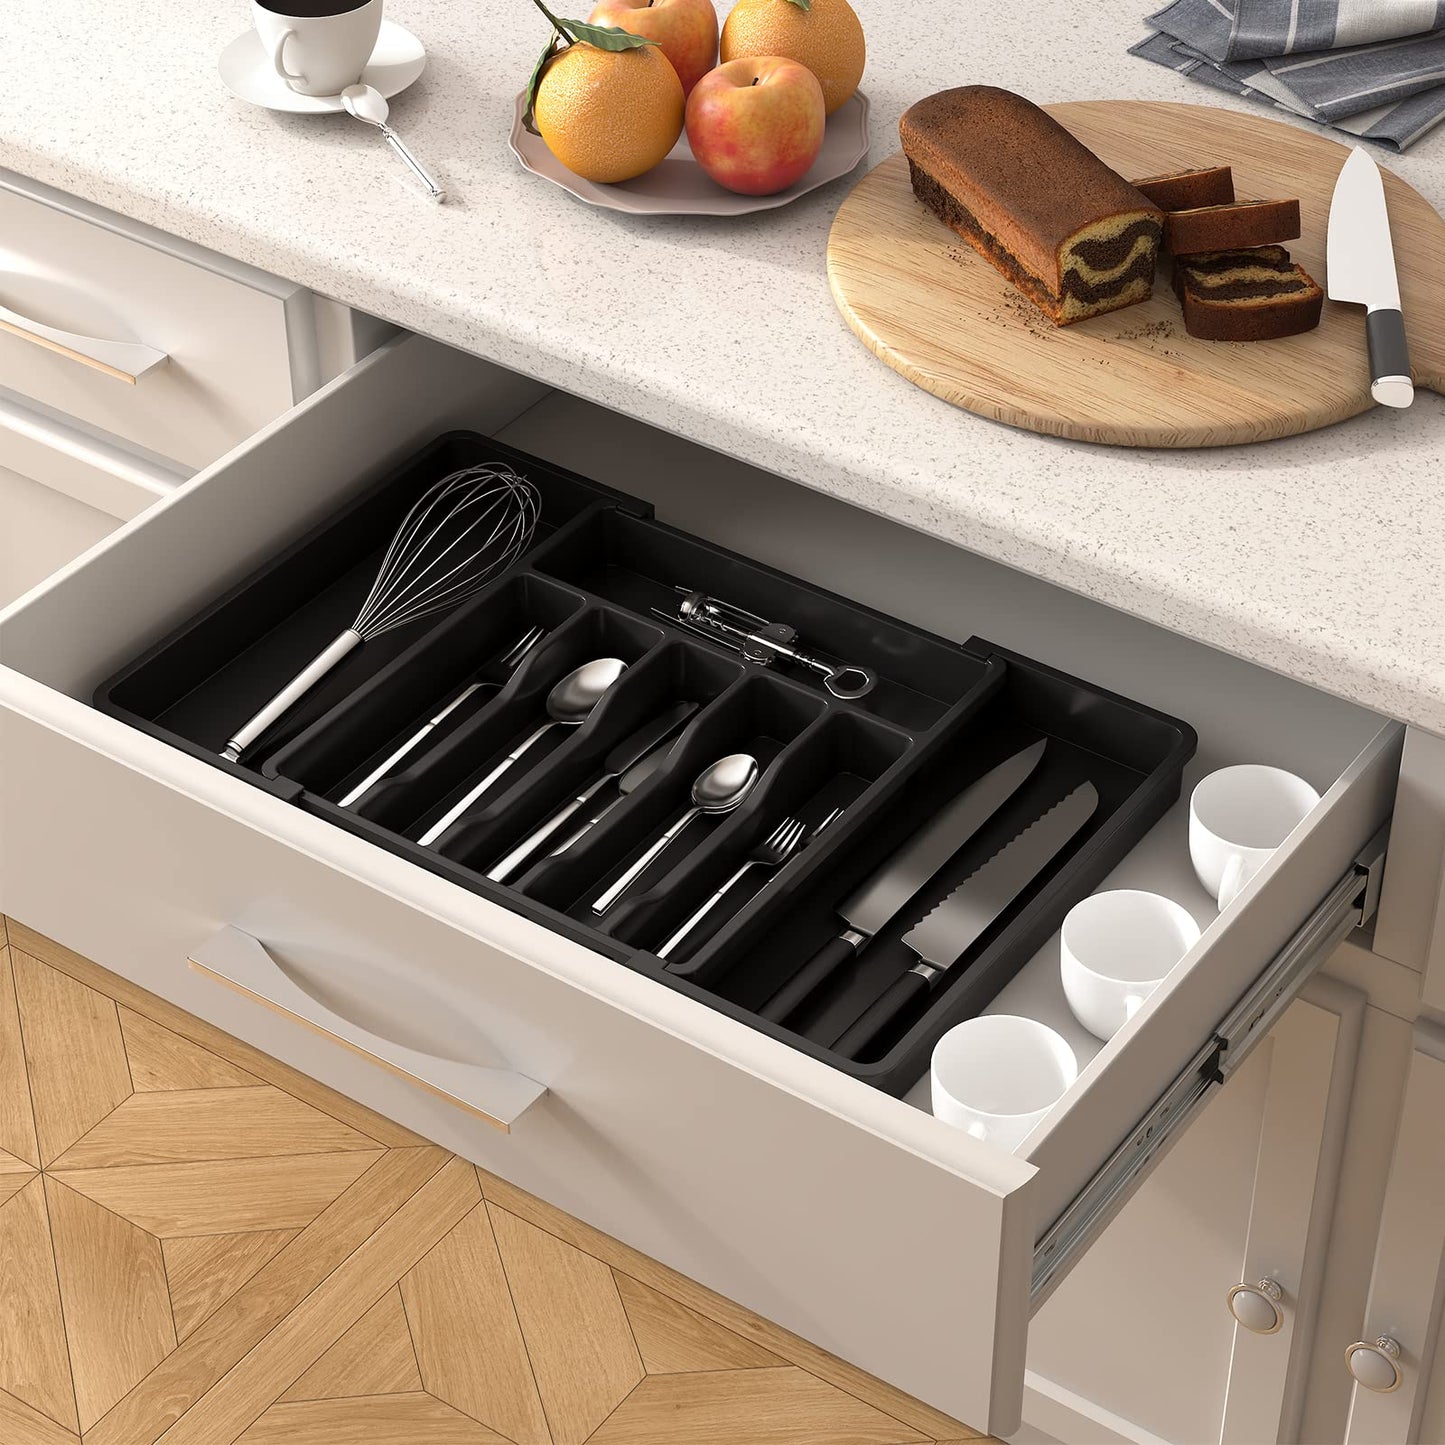 Lifewit Cutlery Drawer Organiser, Expandable Utensil Tray for Kitchen, Adjustable Silverware and Flatware Holder, Compact Plastic Storage for Spoons Forks Knives, Large, Black